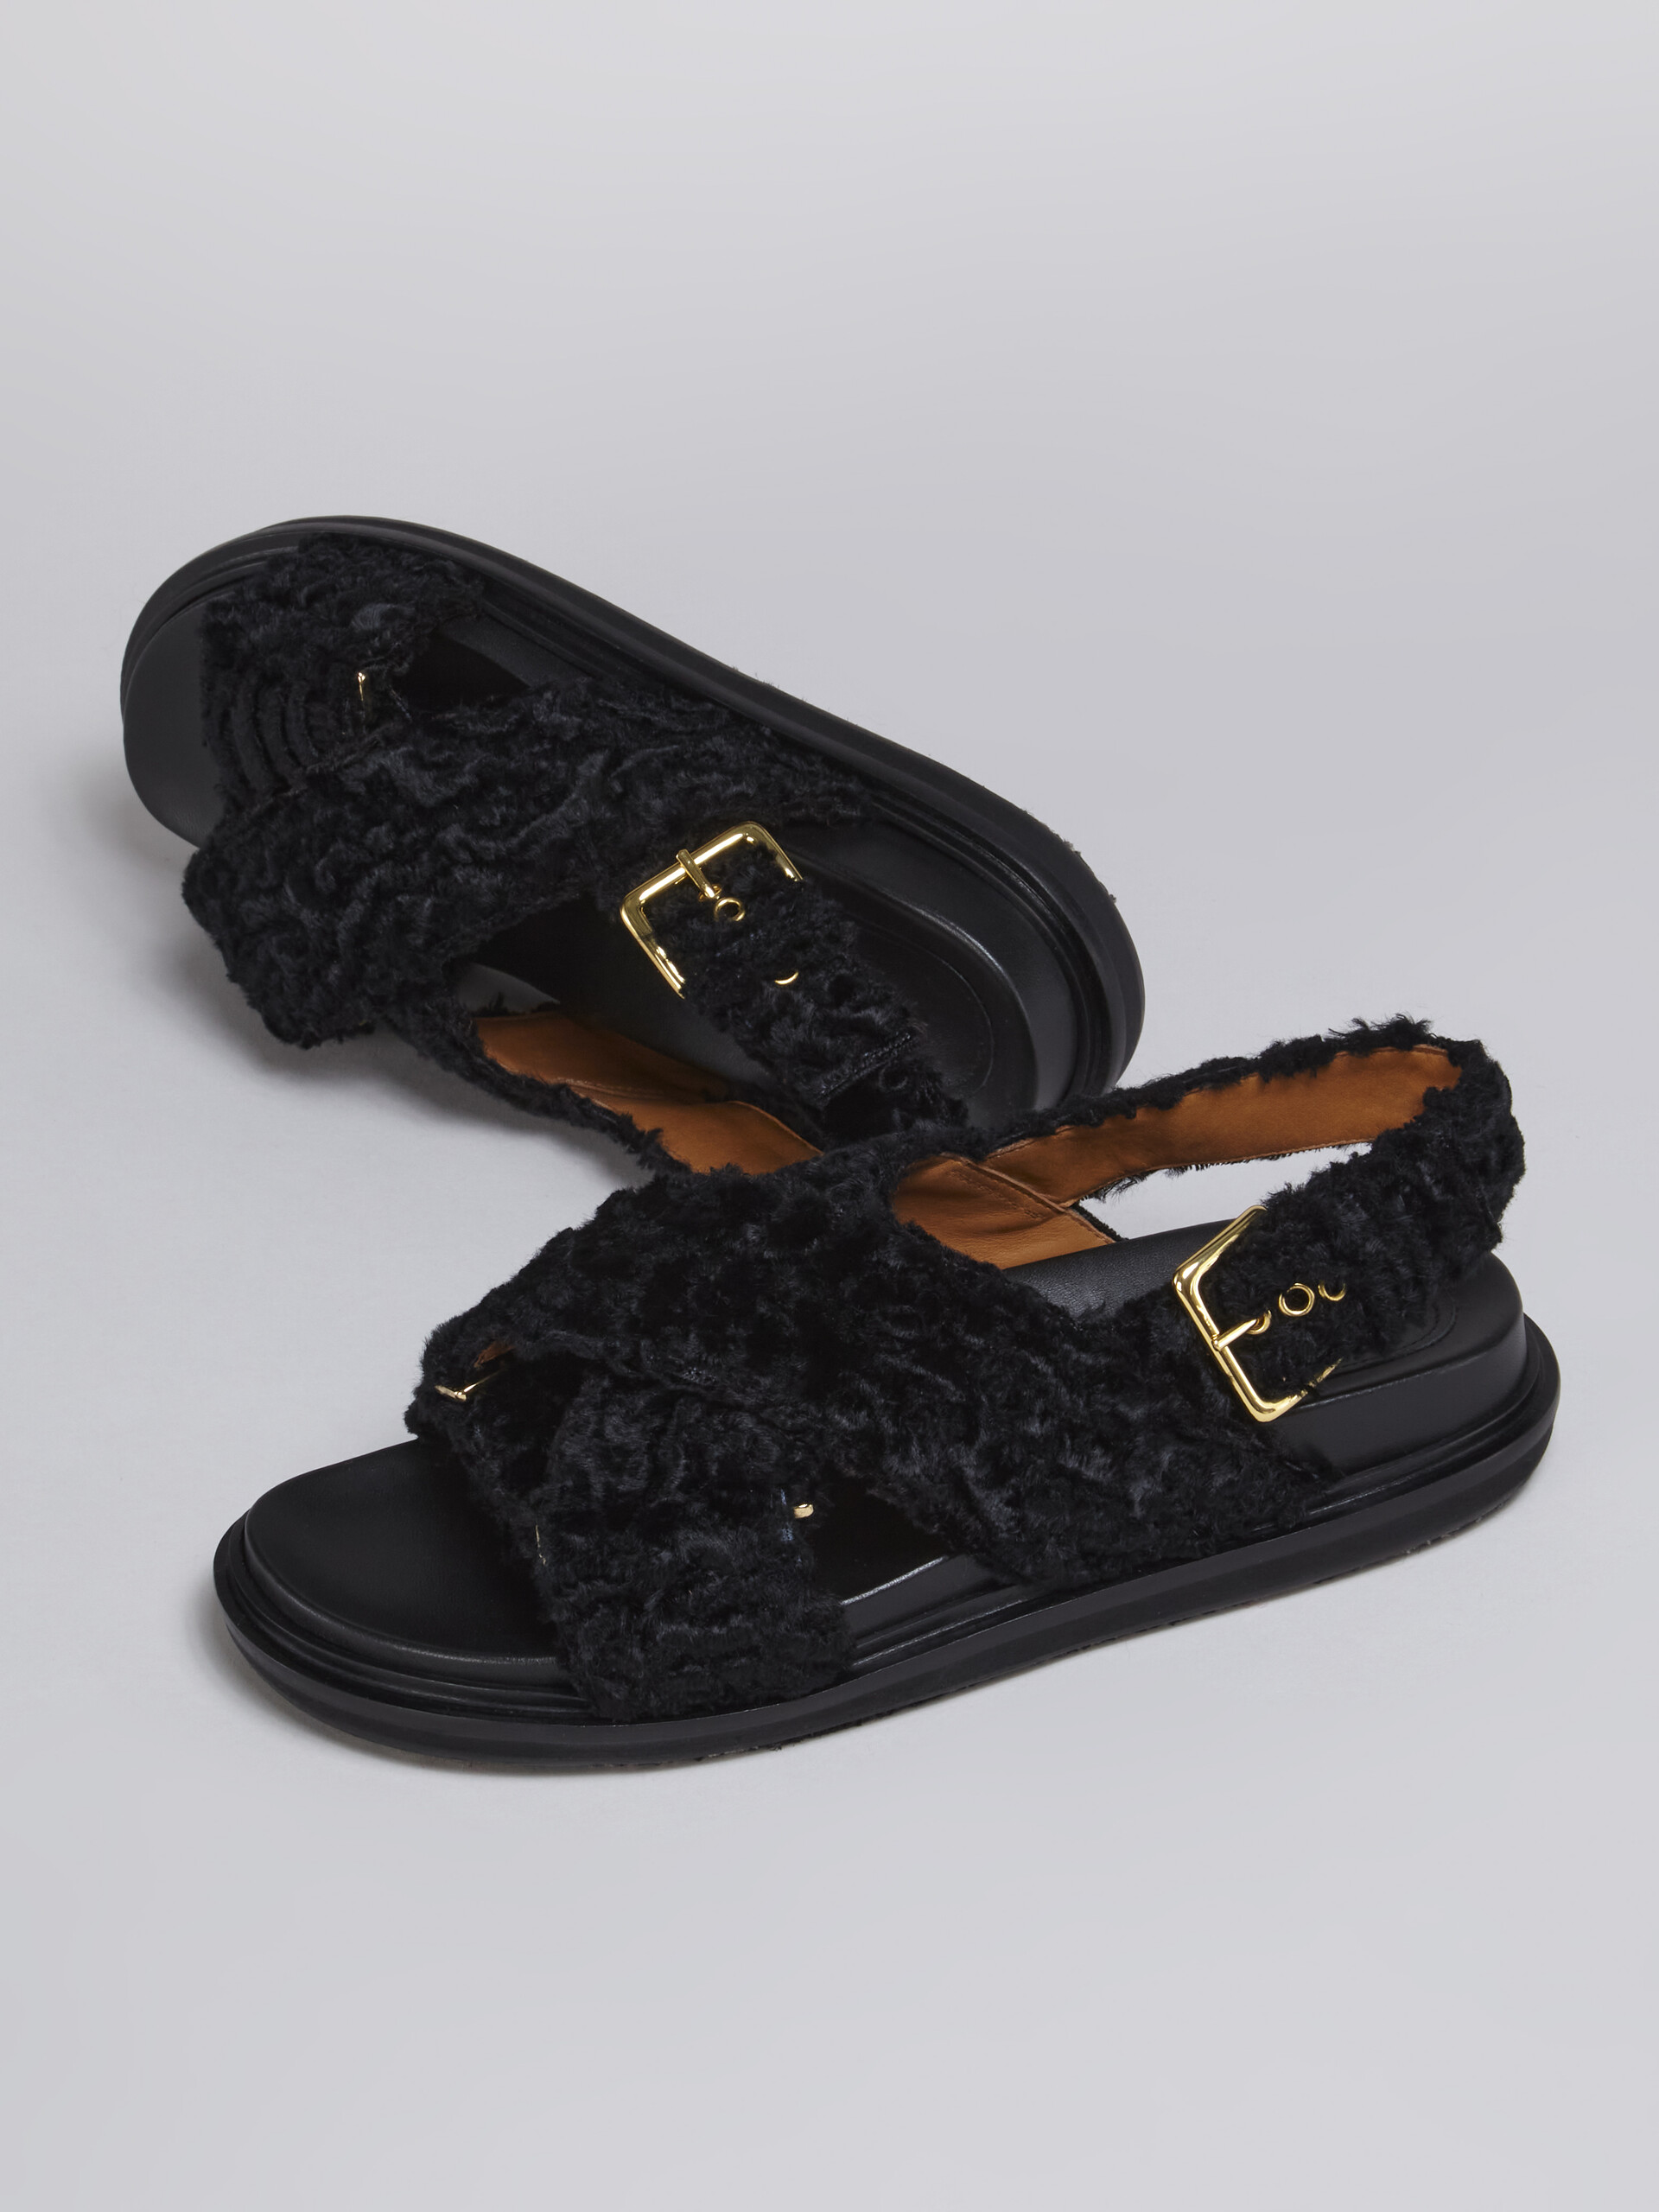 Fussbett in curly hair fabric - Sandals - Image 5